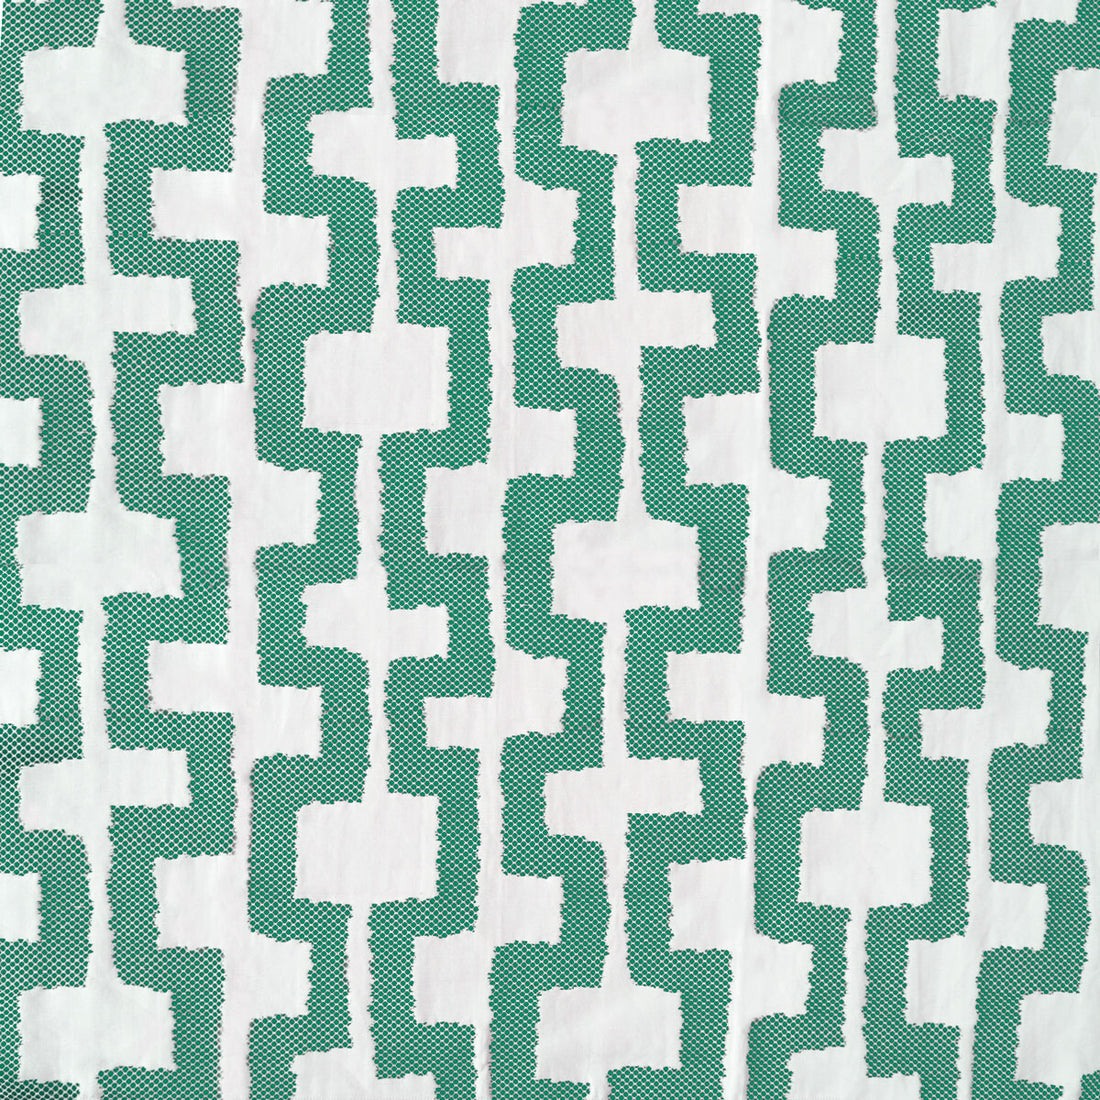 Ryu fabric in verde color - pattern GDT5628.004.0 - by Gaston y Daniela in the Gaston Japon collection